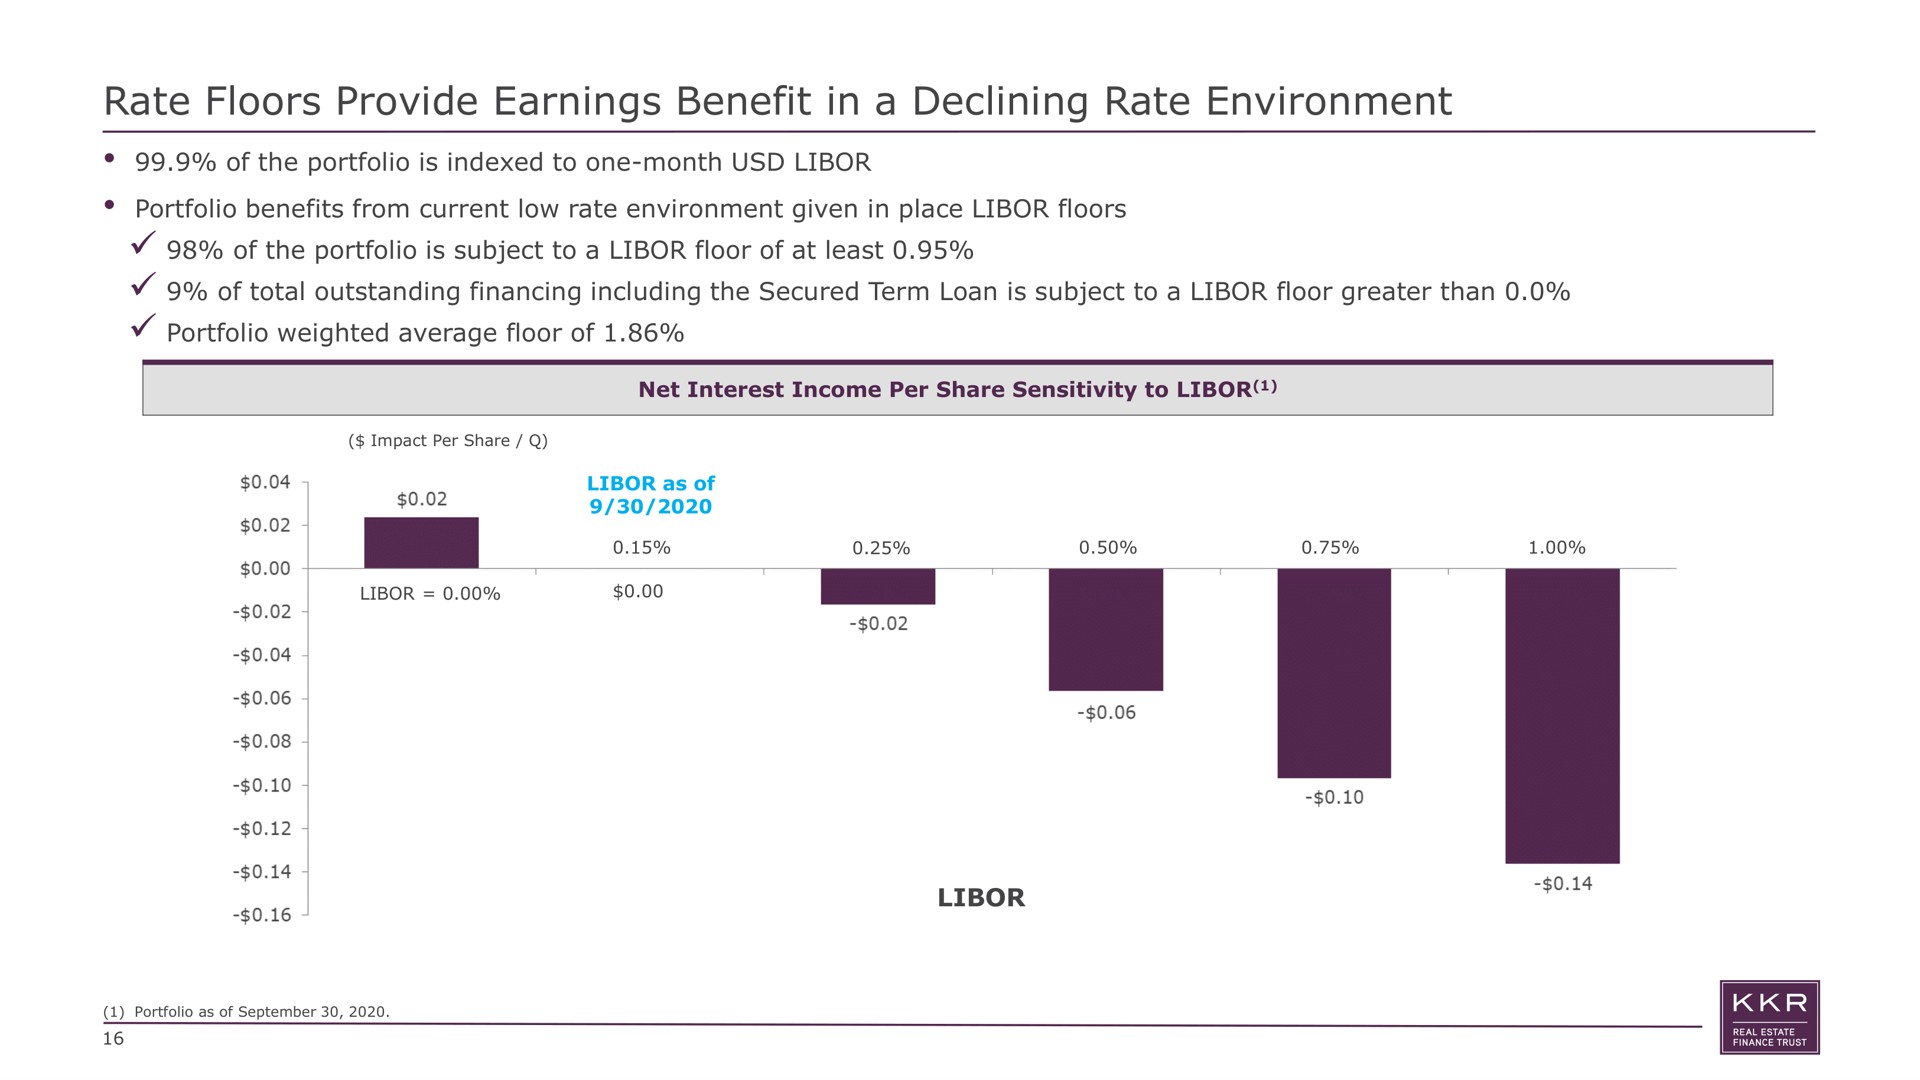 rate floors provide earnings benefit in a declining rate environment of the portfolio is indexed to one month portfolio benefits from current low given place of the portfolio is subject to floor of at least of total outstanding financing including the secured term loan is subject to floor greater than portfolio weighted average floor of net interest income per share sensitivity to as of pone | KKR Real Estate Finance Trust